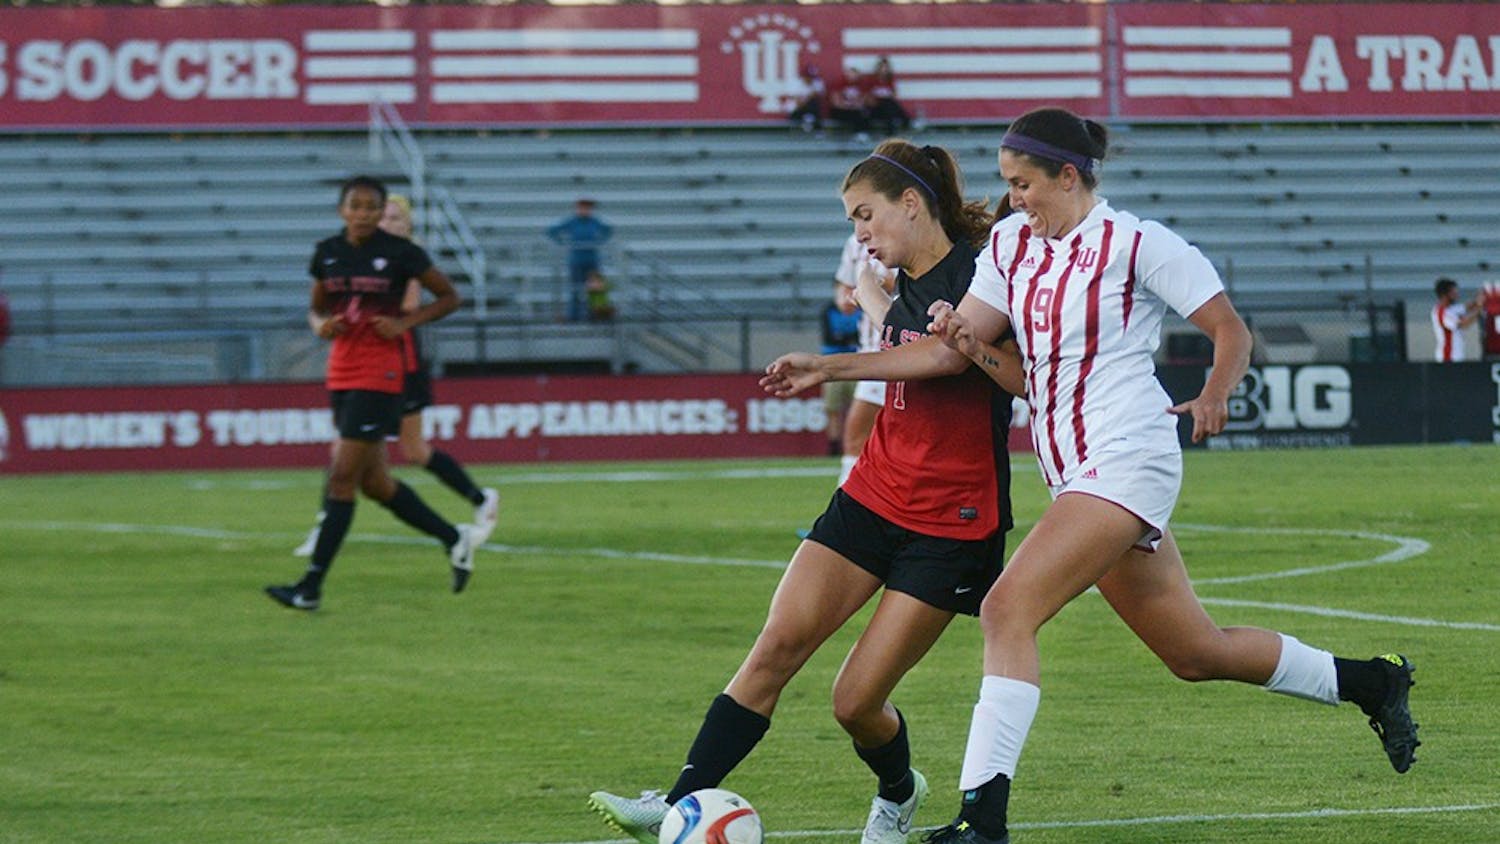 Junior forward Lauren Joray works thorugh the Ball State University Cardinals' defense at Bill Armstrong stadium on Sunday evening. The game ended in a 1-1 draw.